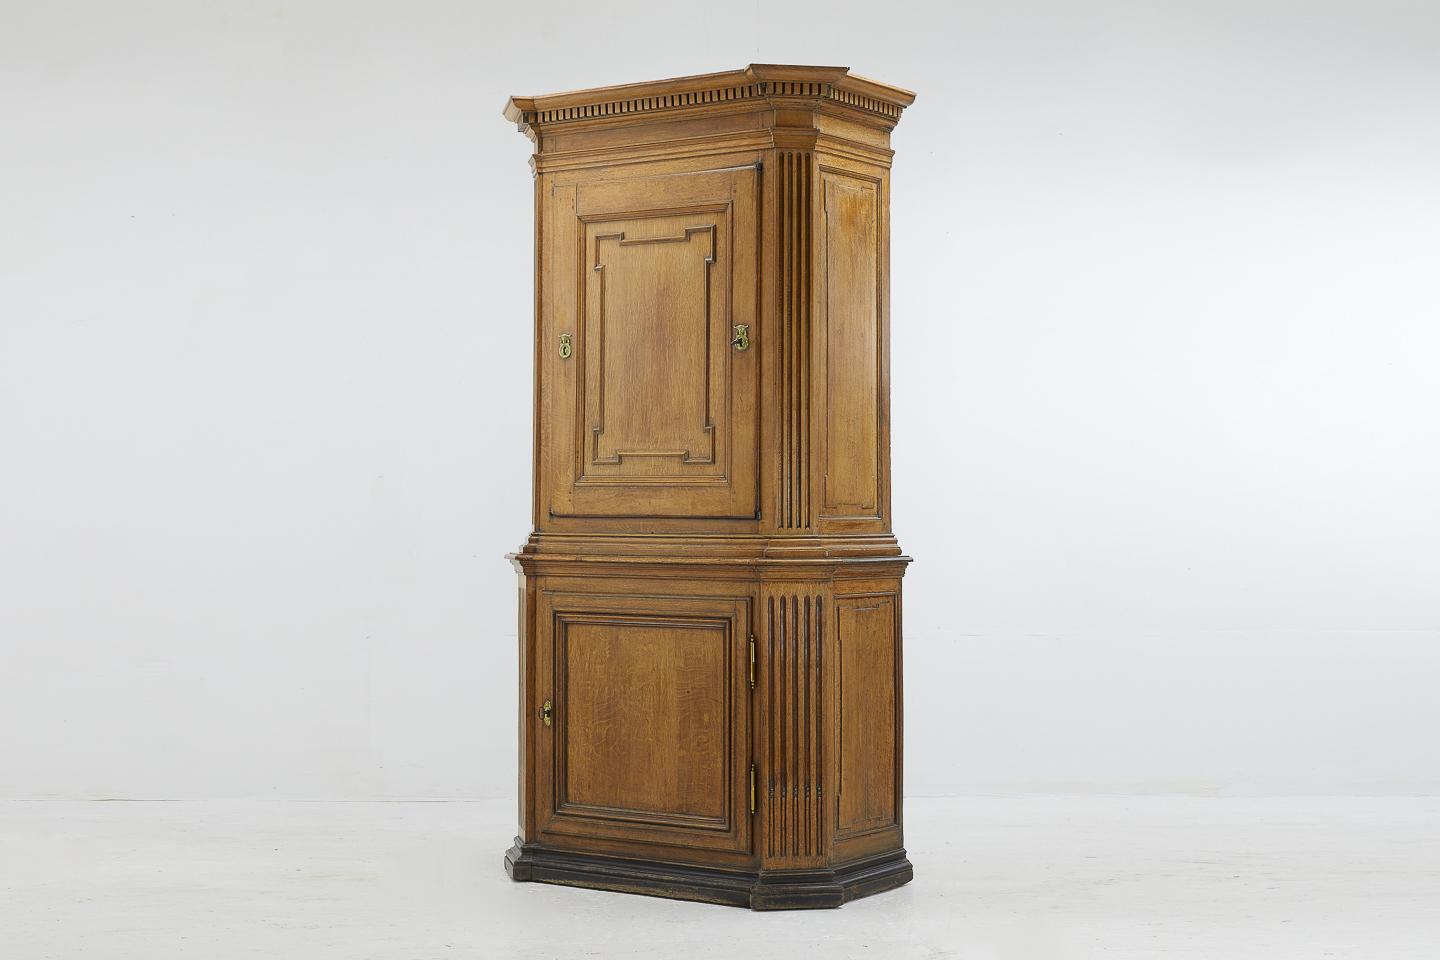 French 18th century architectural oak cabinet.